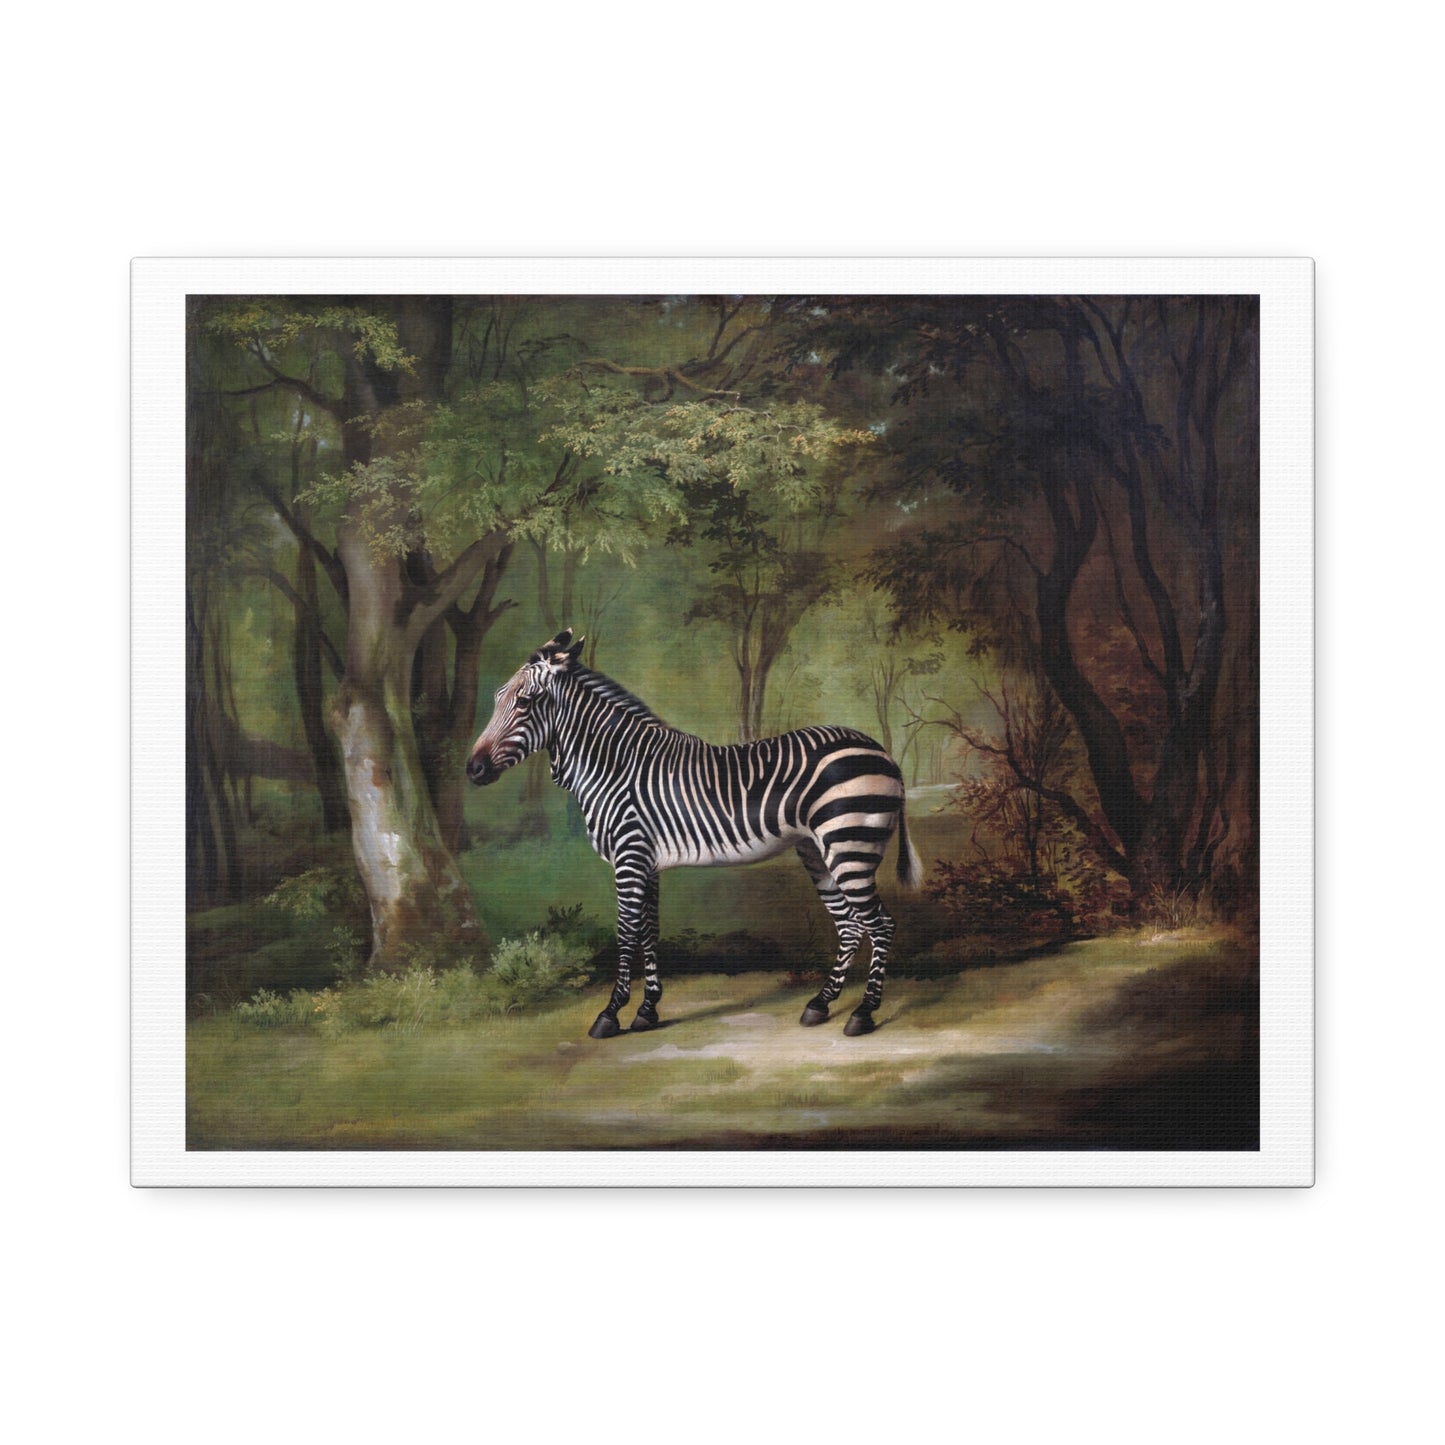 Zebra (1763) by George Stubbs, from the Original, Art Print on Canvas